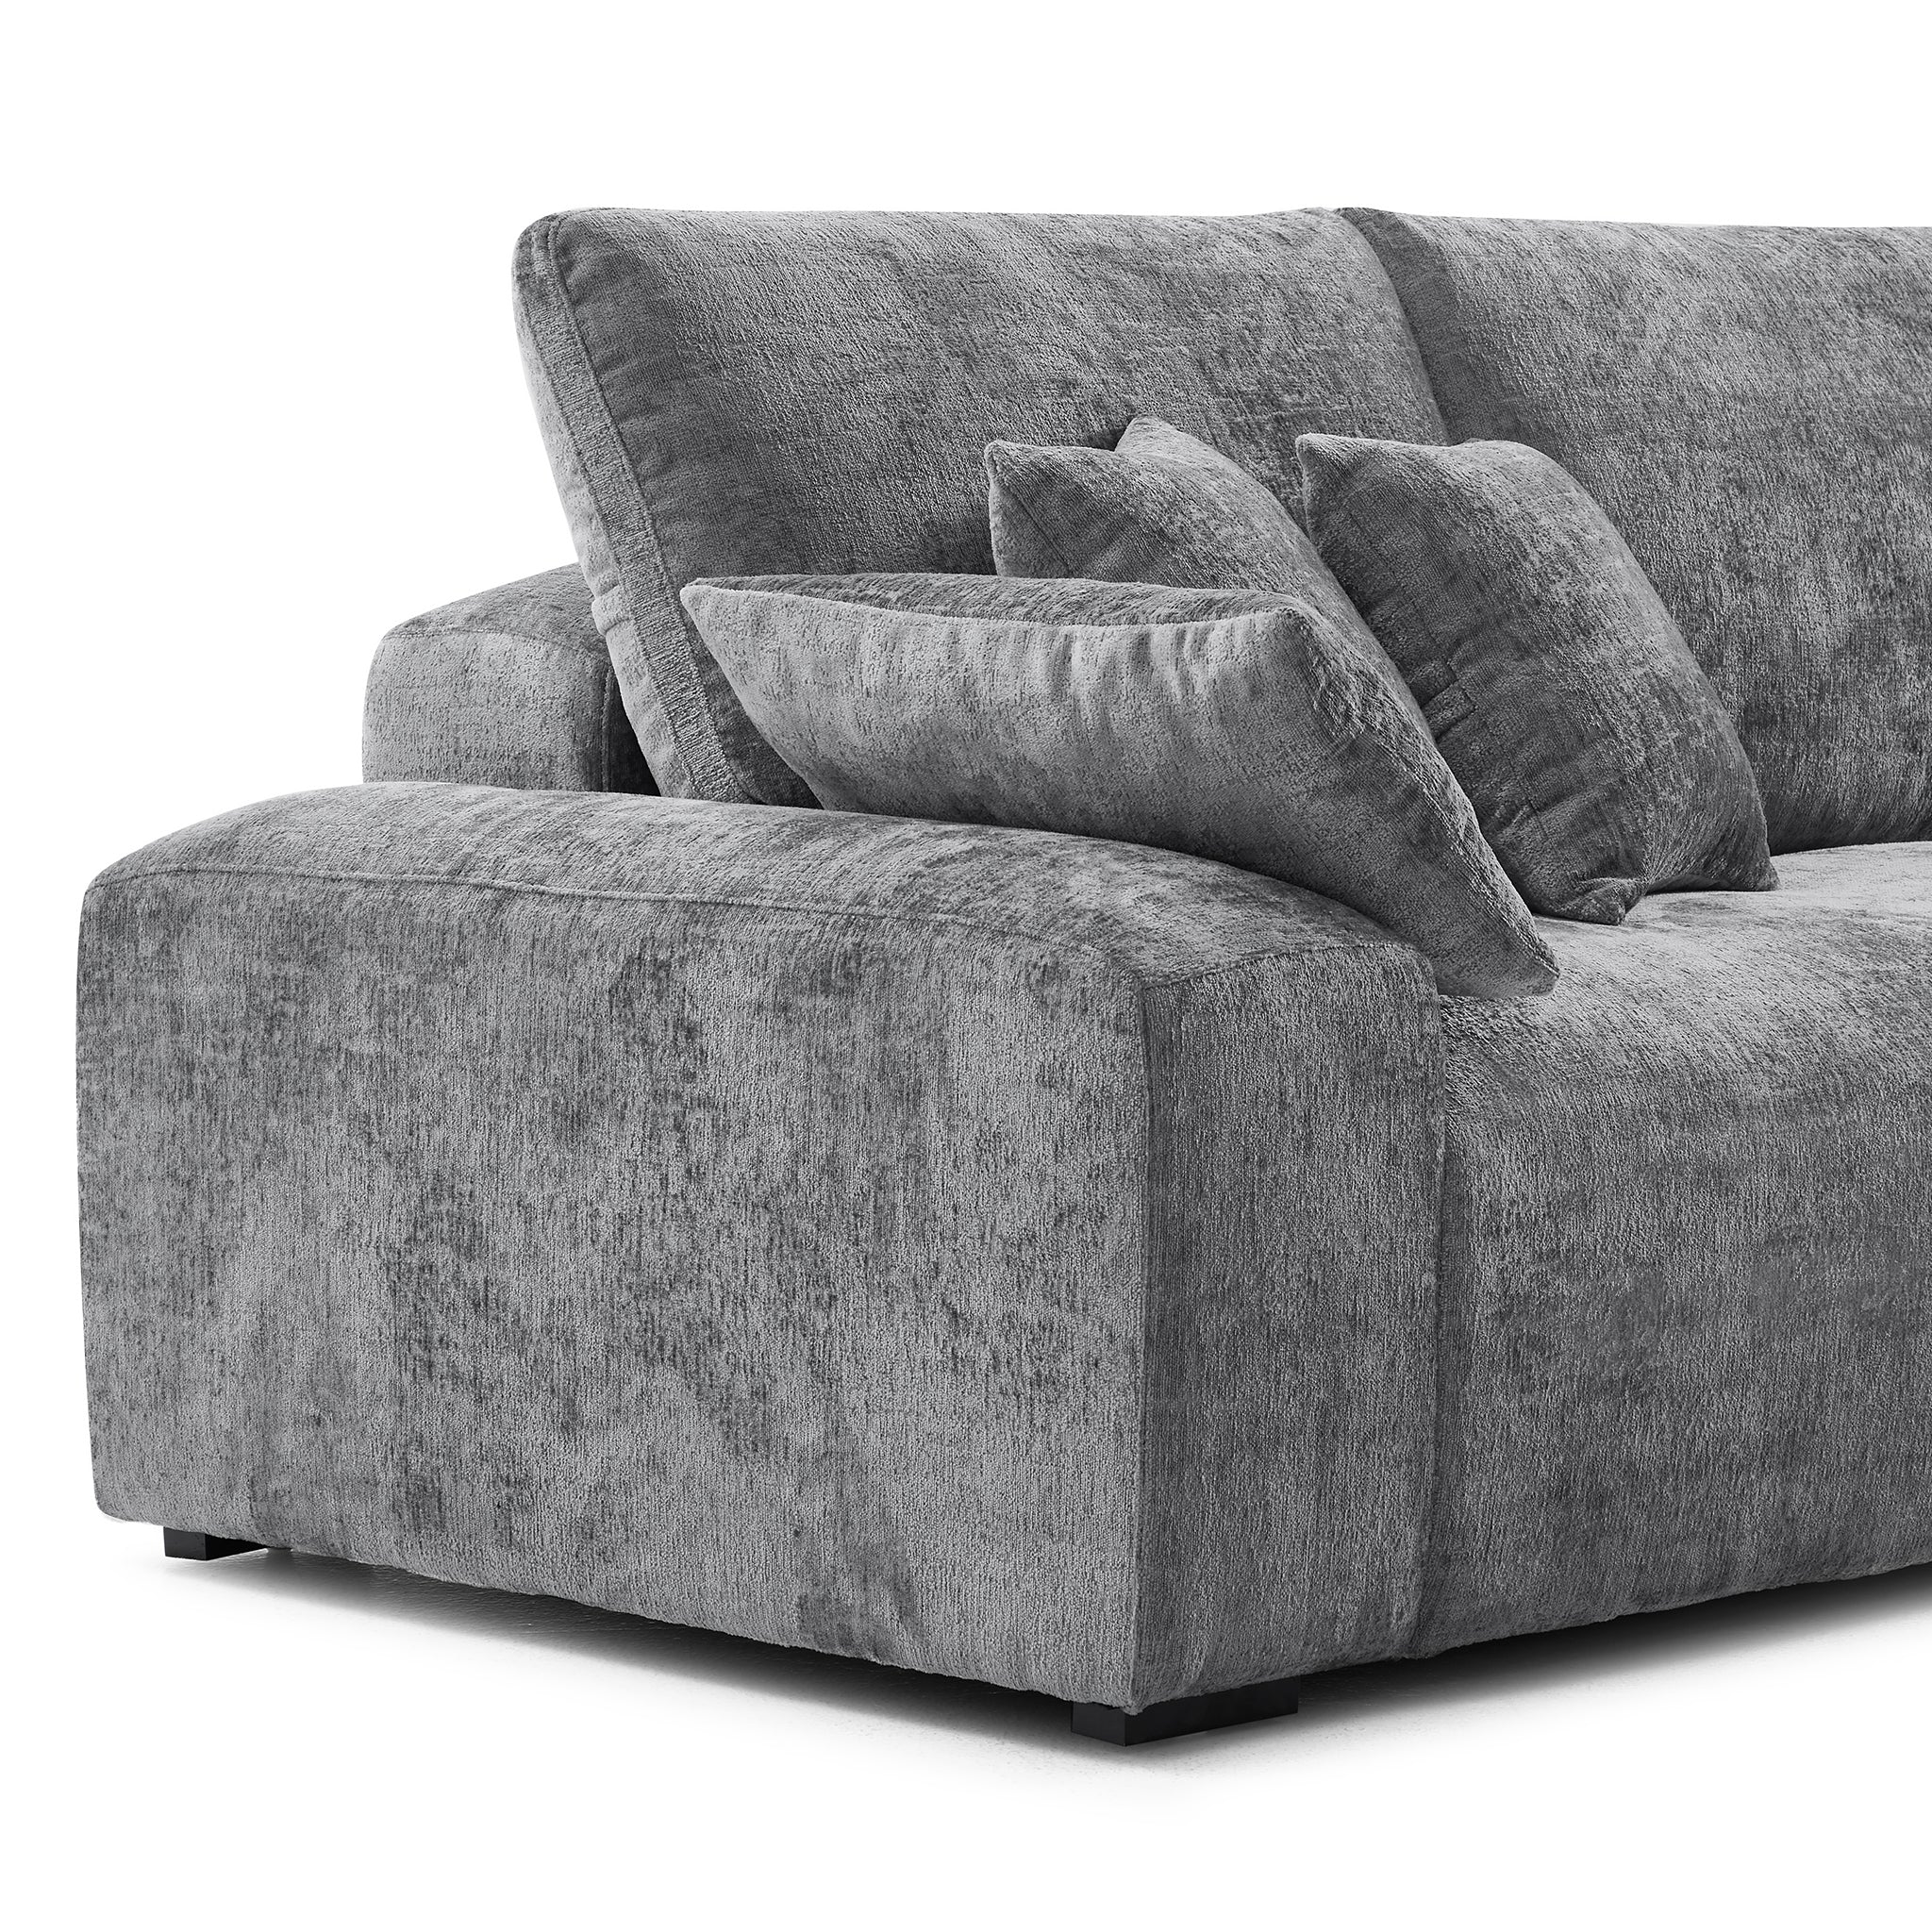 The Empress Gray Sectional